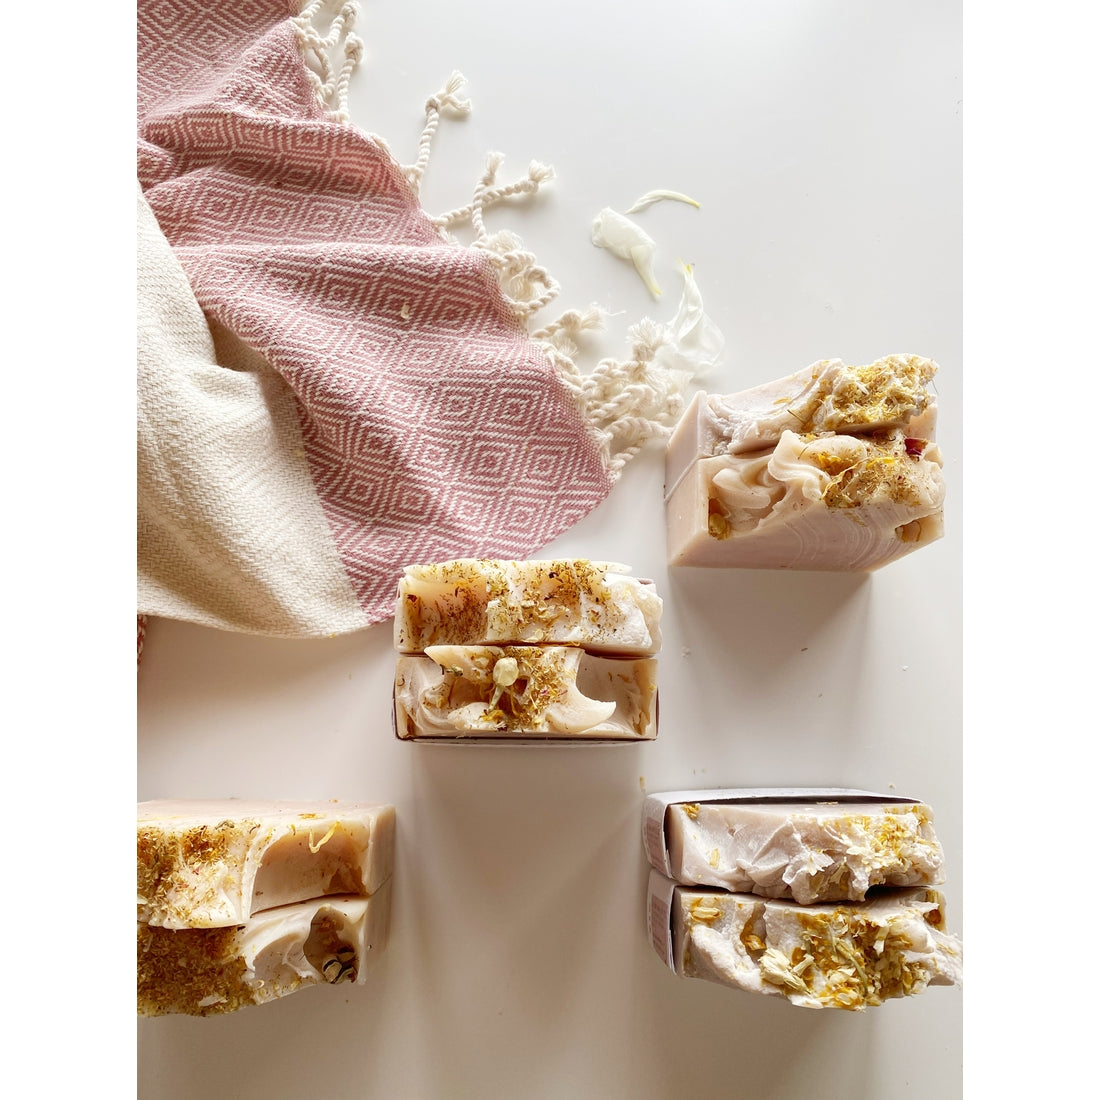 Handmade Lilac Soap Bars with flower petals and gold flakes, arranged neatly beside a pink patterned towel on a white surface, with some creamy sustainable soap mixture artistically splattered around.